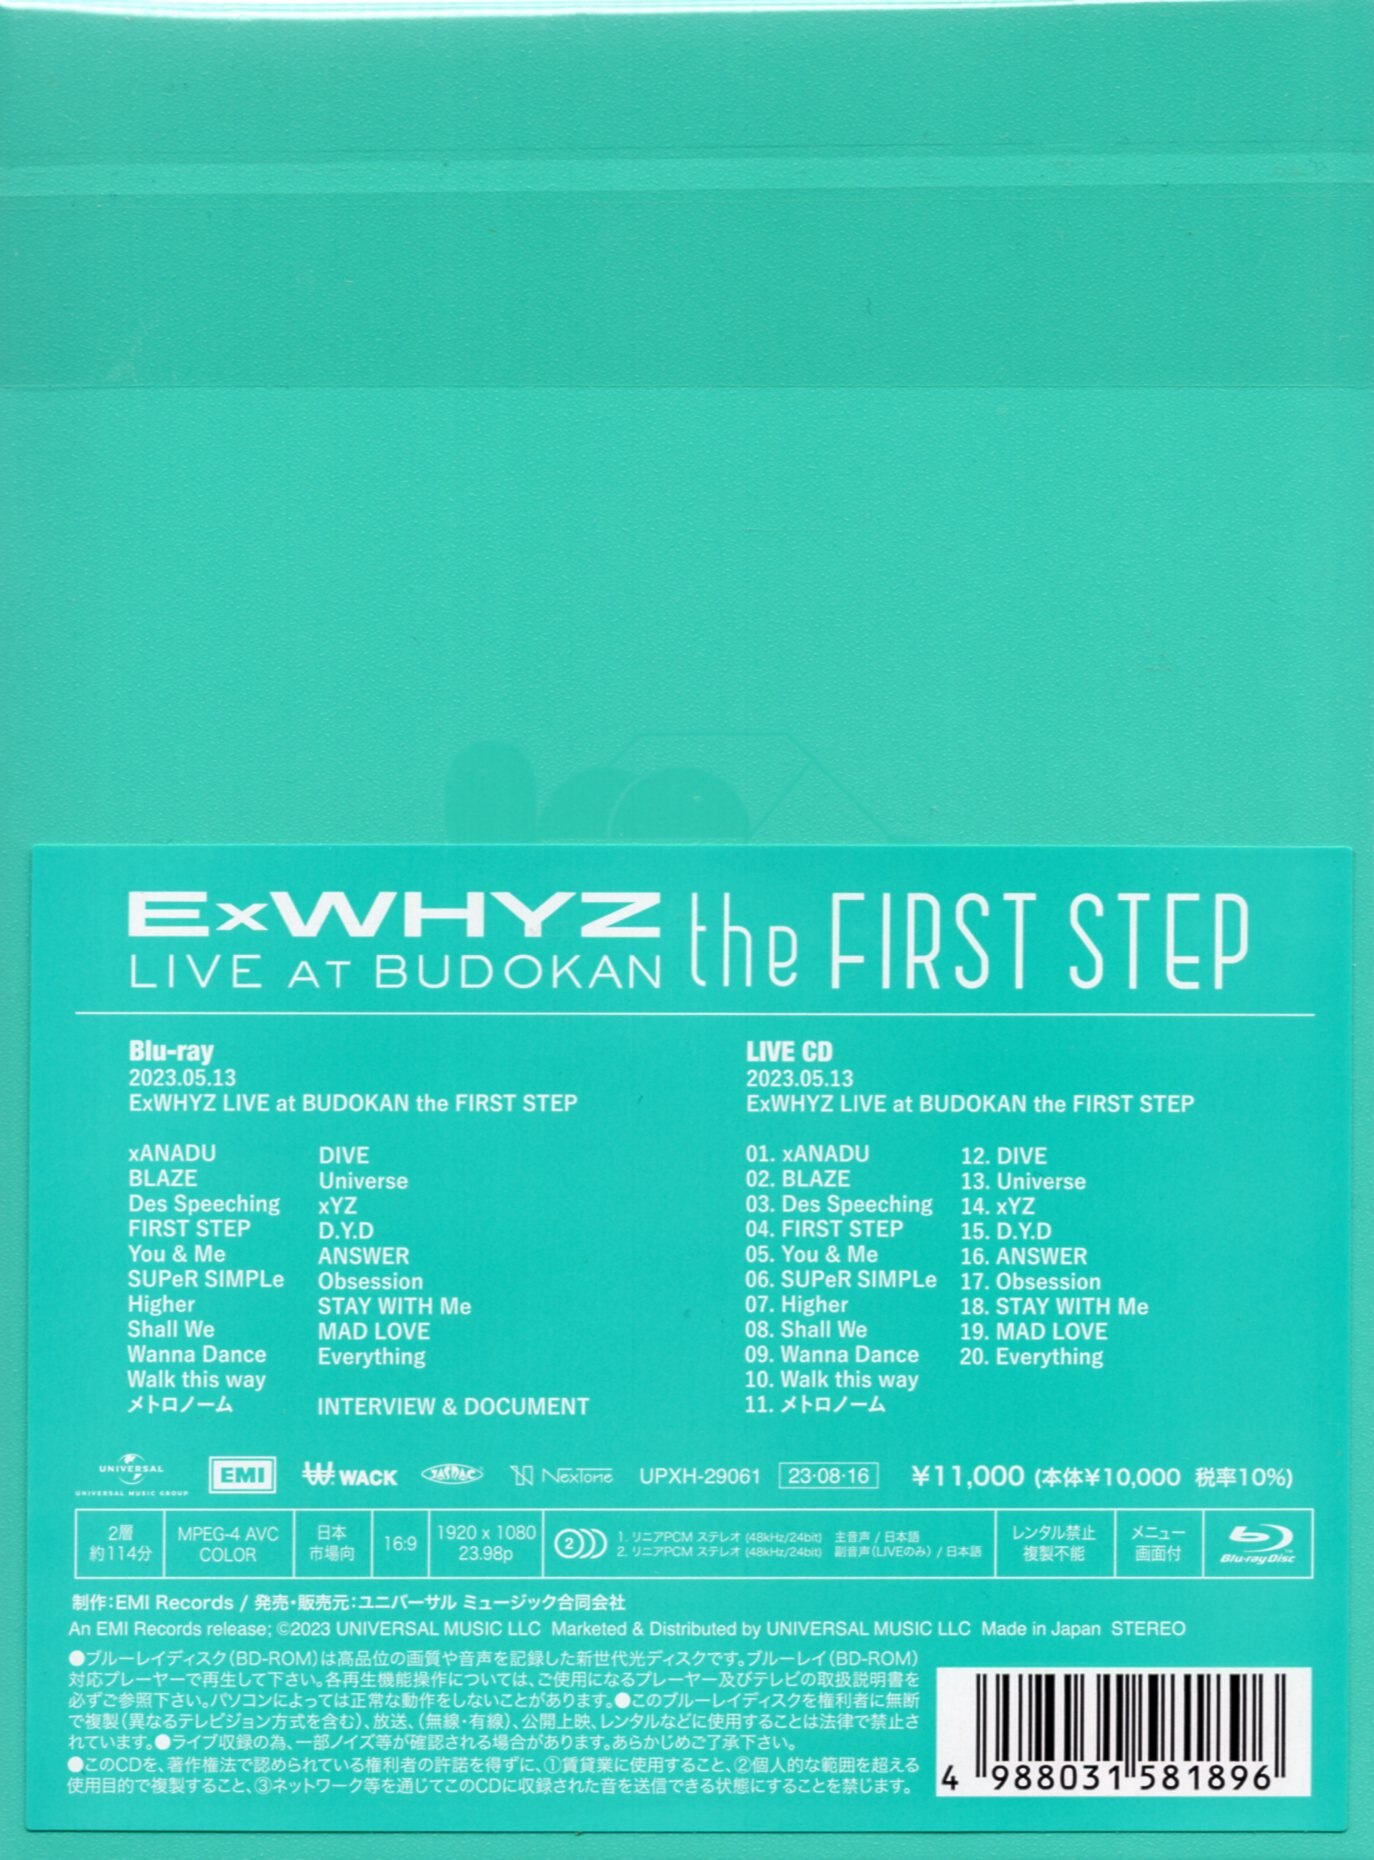 Blu-ray ExWHYZ LIVE AT BUDOKAN the FIRST STEP First edition